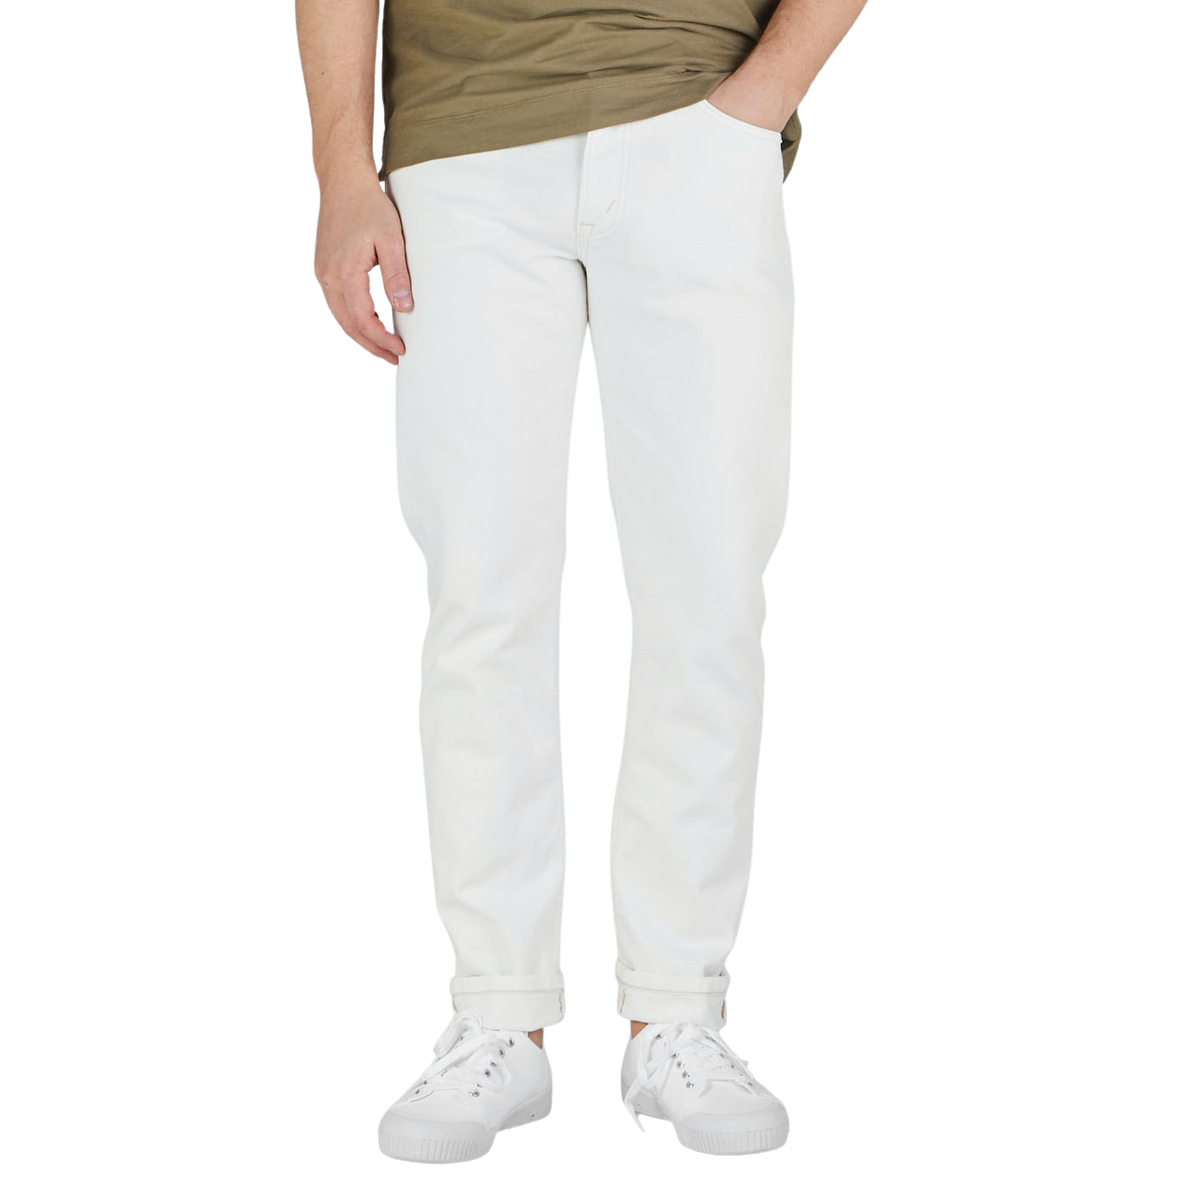 Jenerica Natural White Cotton TM005 Jeans Front1